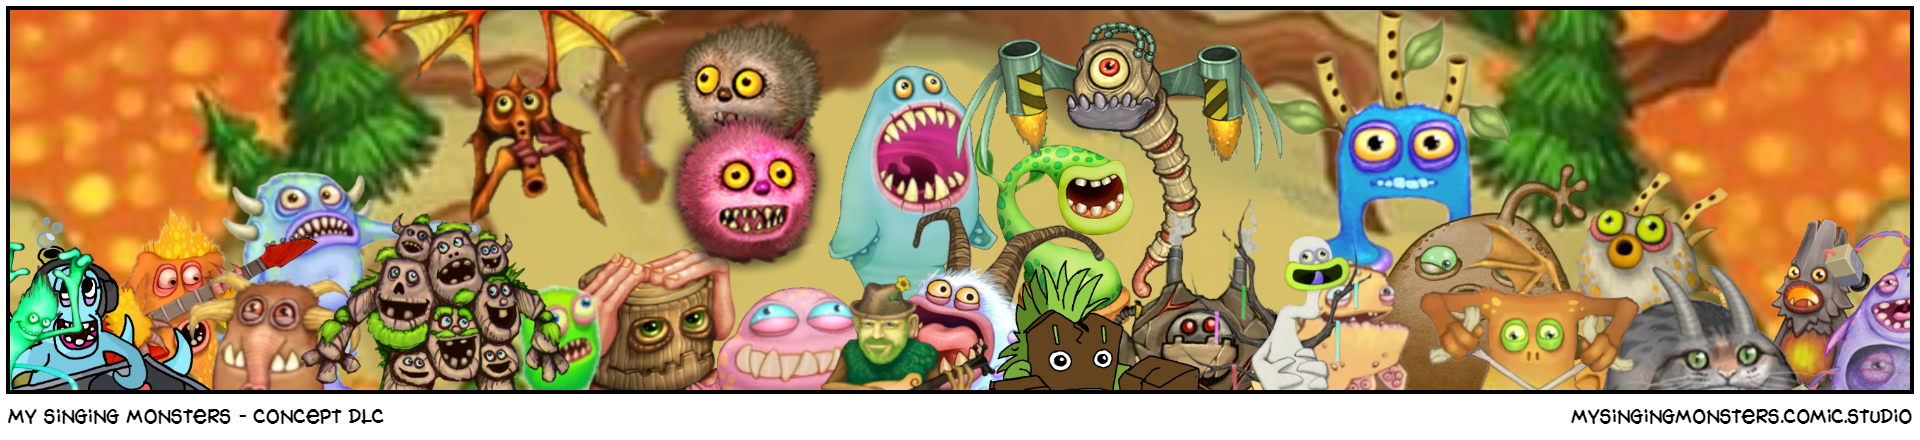 My singing monsters - concept dlc